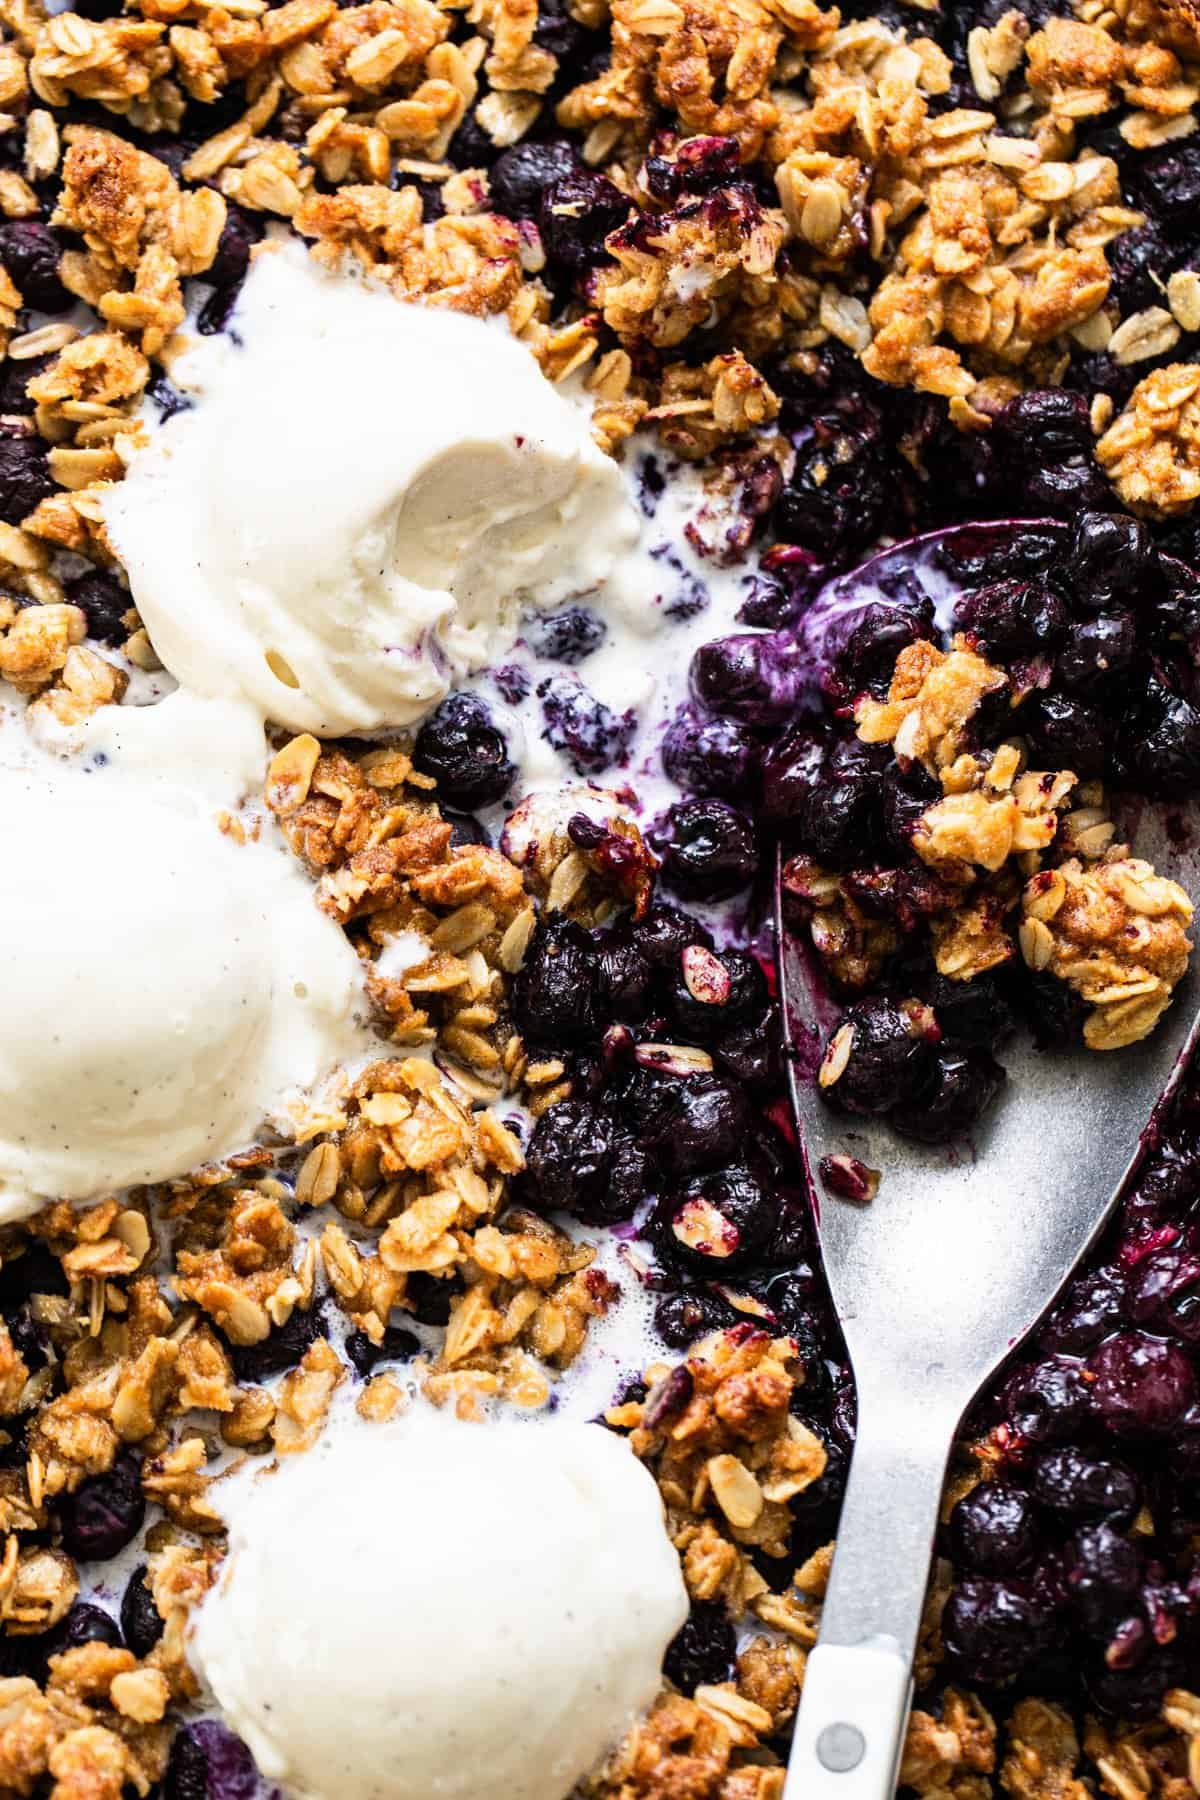 Baked blueberry c،ble with scoops of vanilla ice cream.